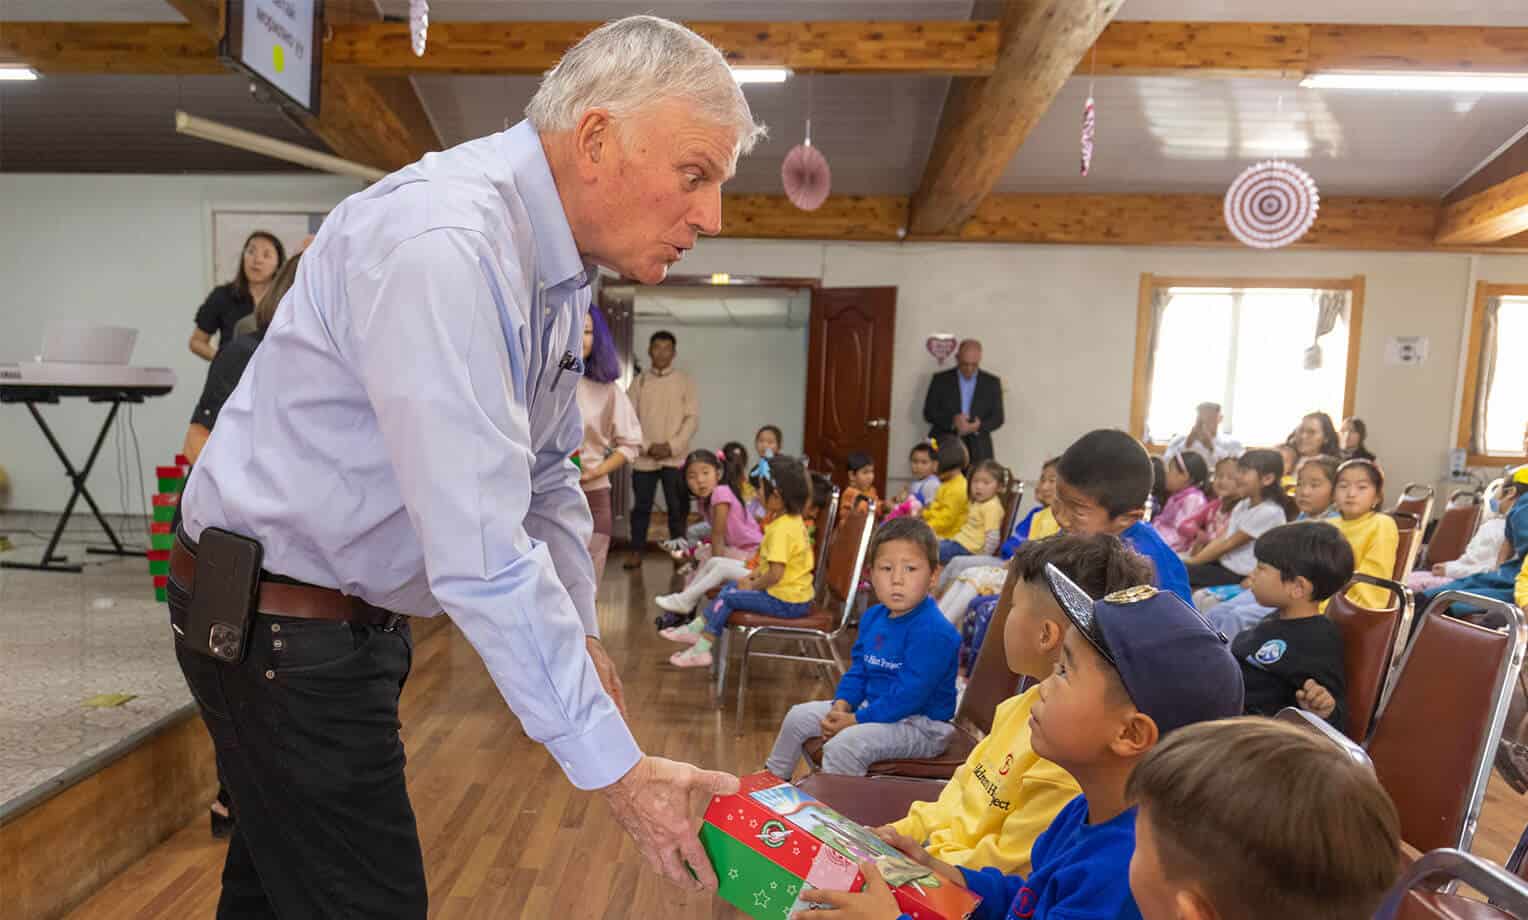 Franklin Graham gives Operation Christmas Child shoebox gifts to boys and girls in Mongolia.